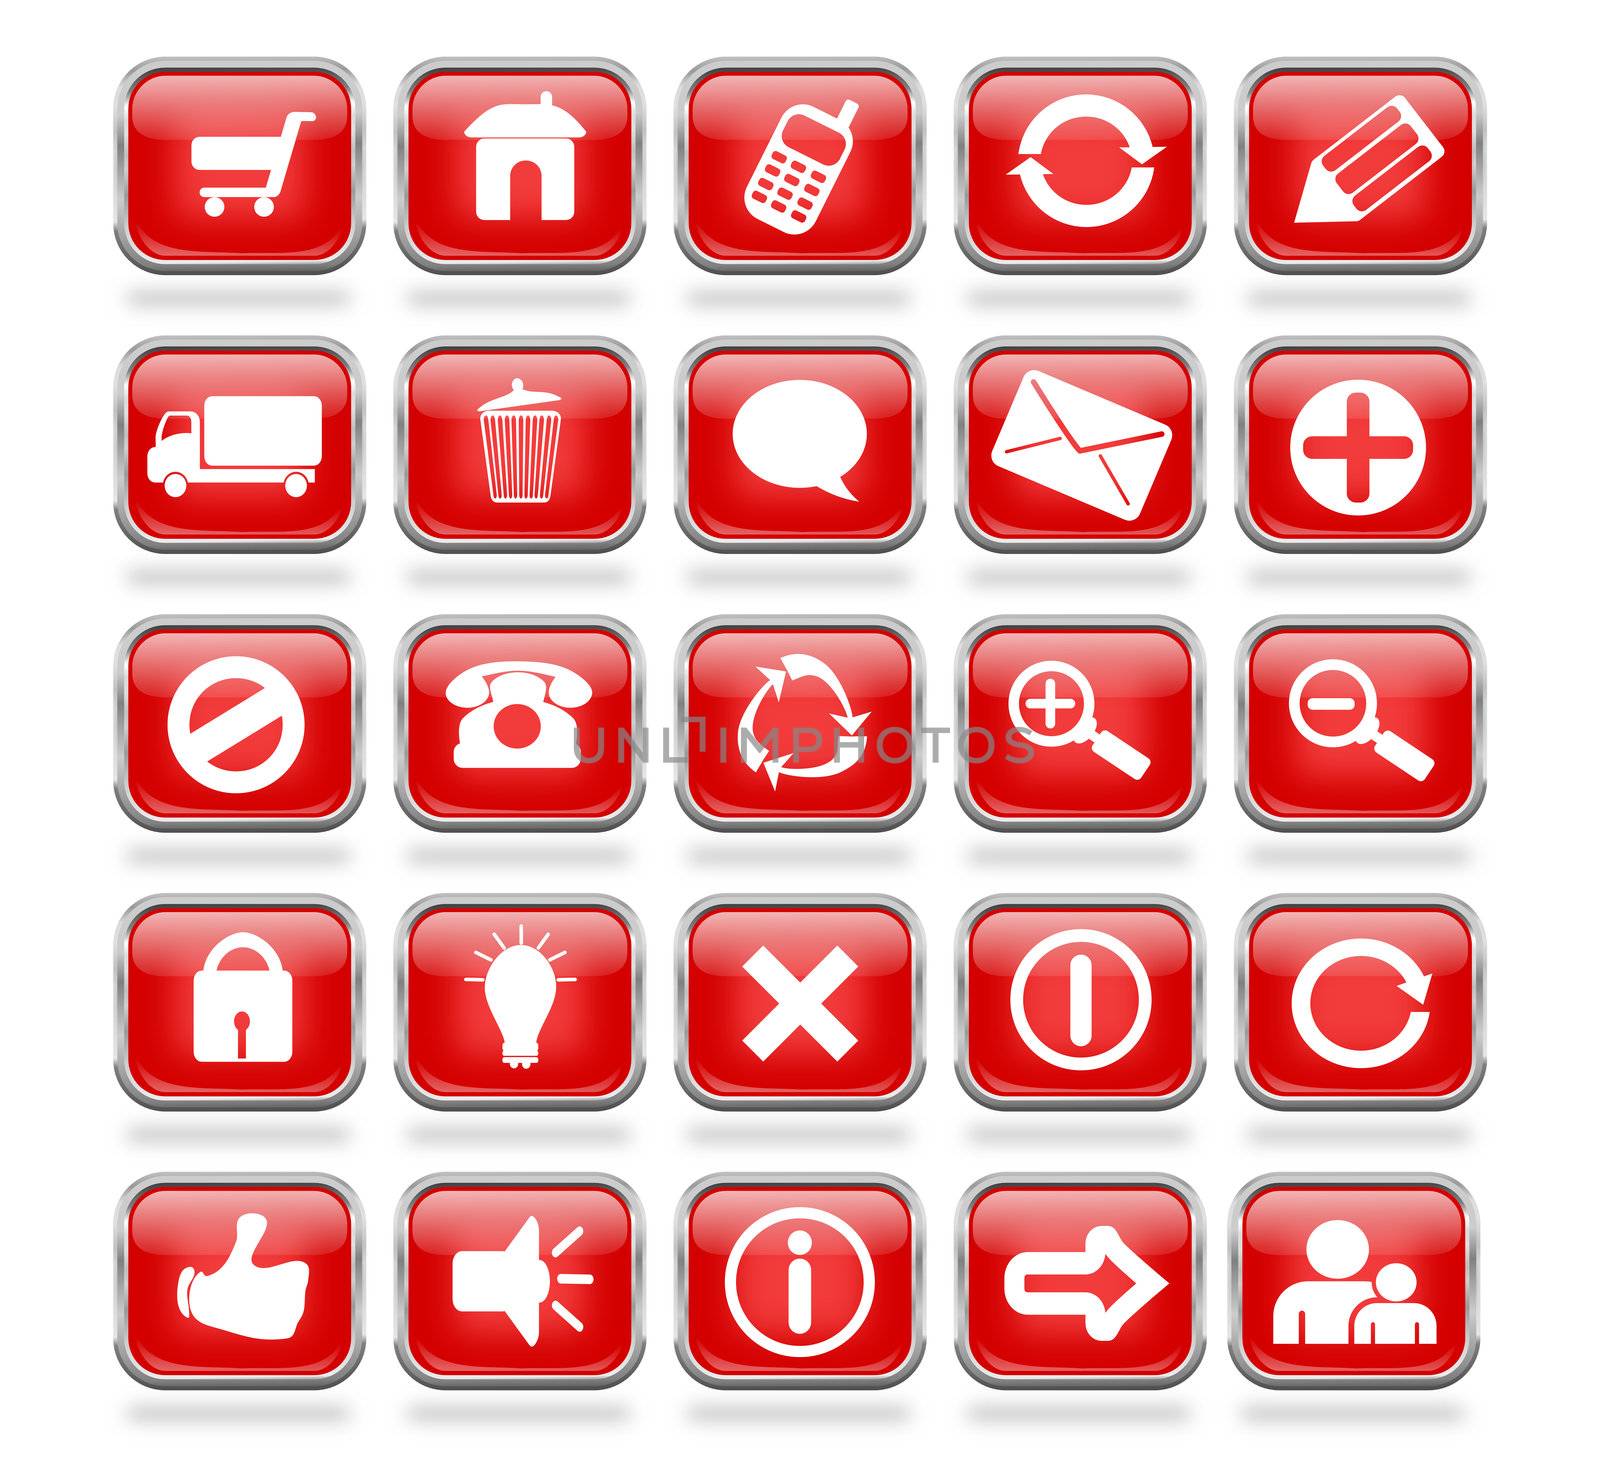 Glossy Red Square Web Buttons by RichieThakur